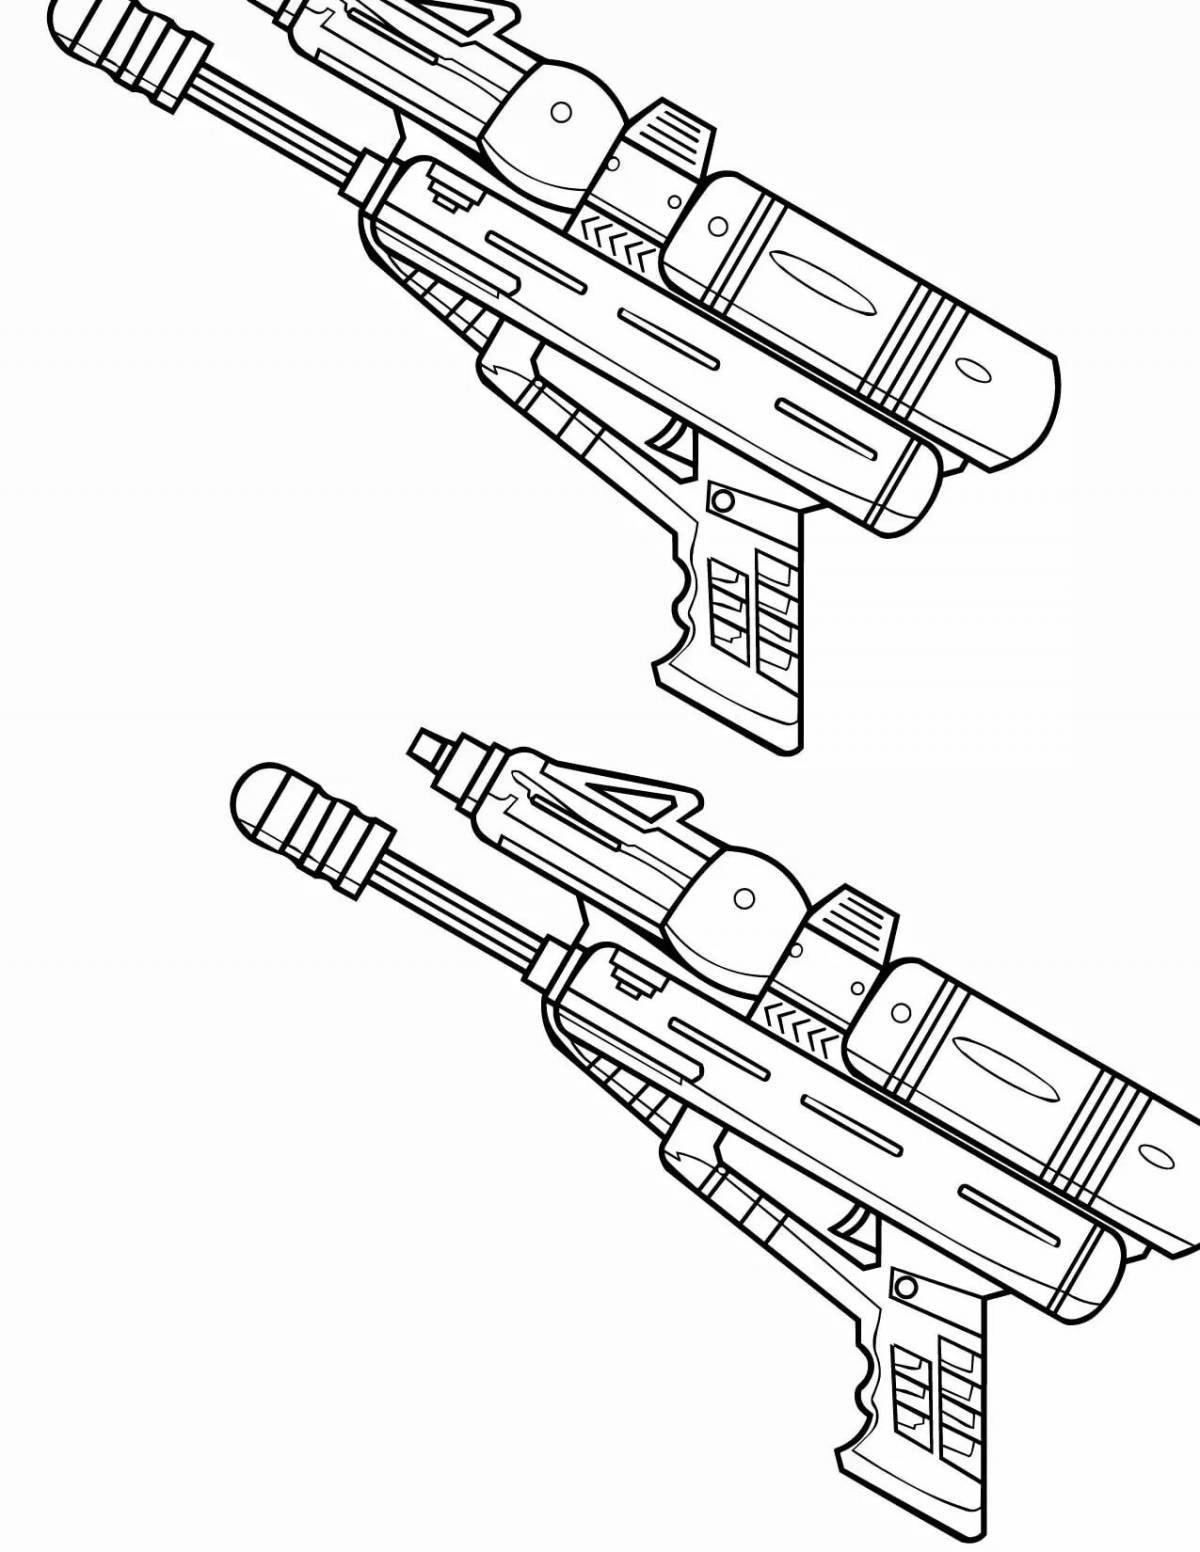 Colorful chicken gun coloring page for boys